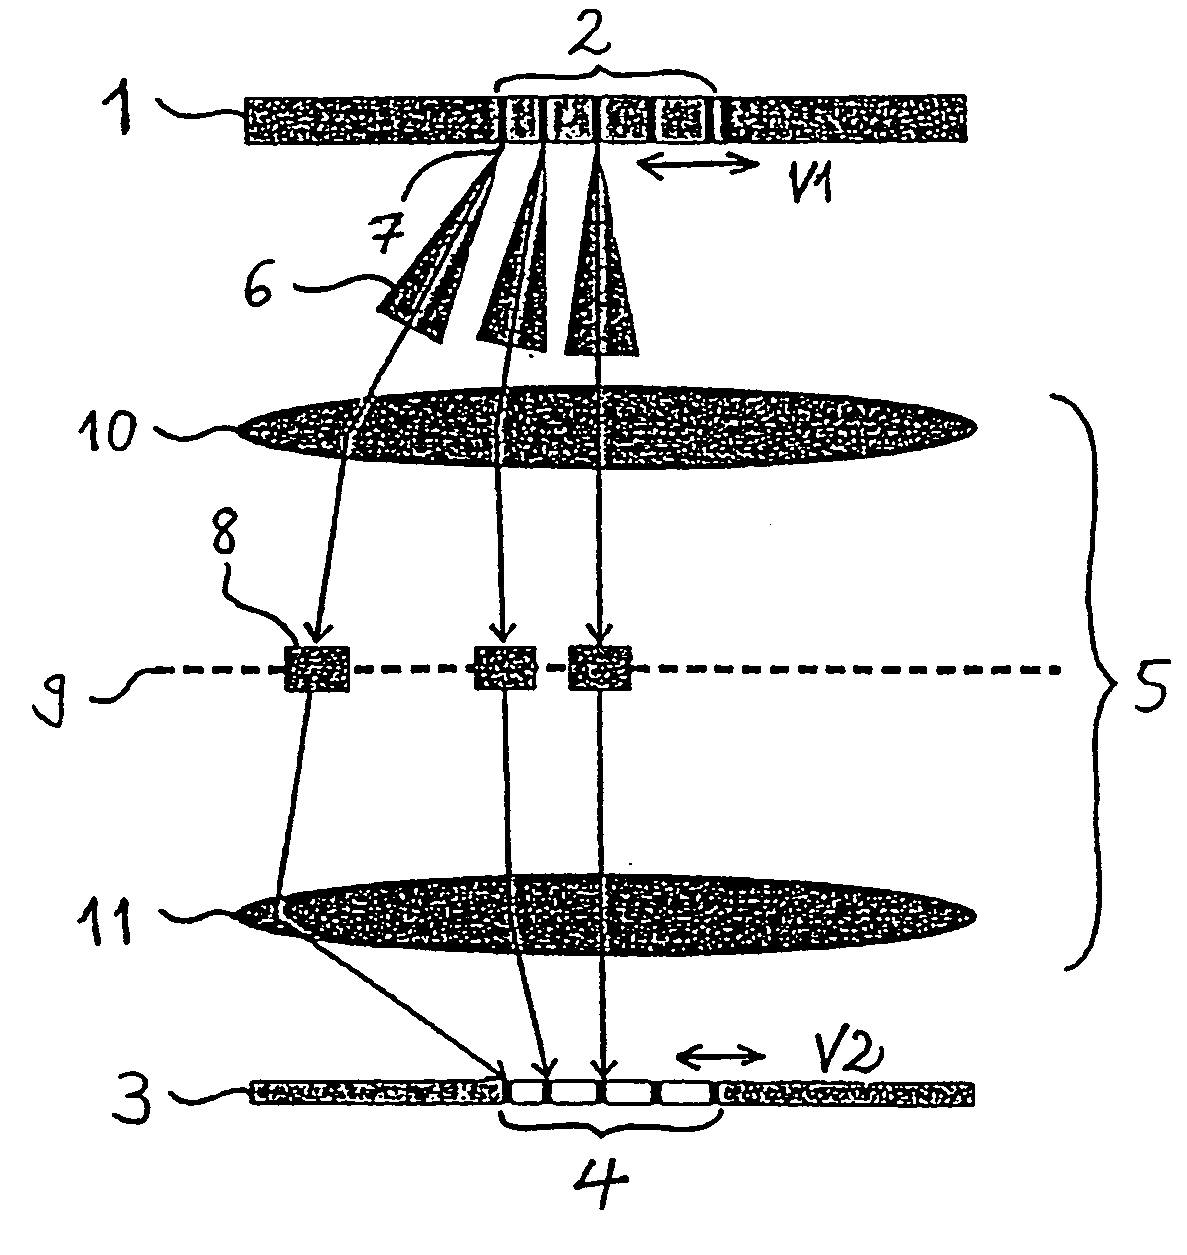 Device and method for wavefront measurement of an optical imaging system, and a microlithography projection exposure machine